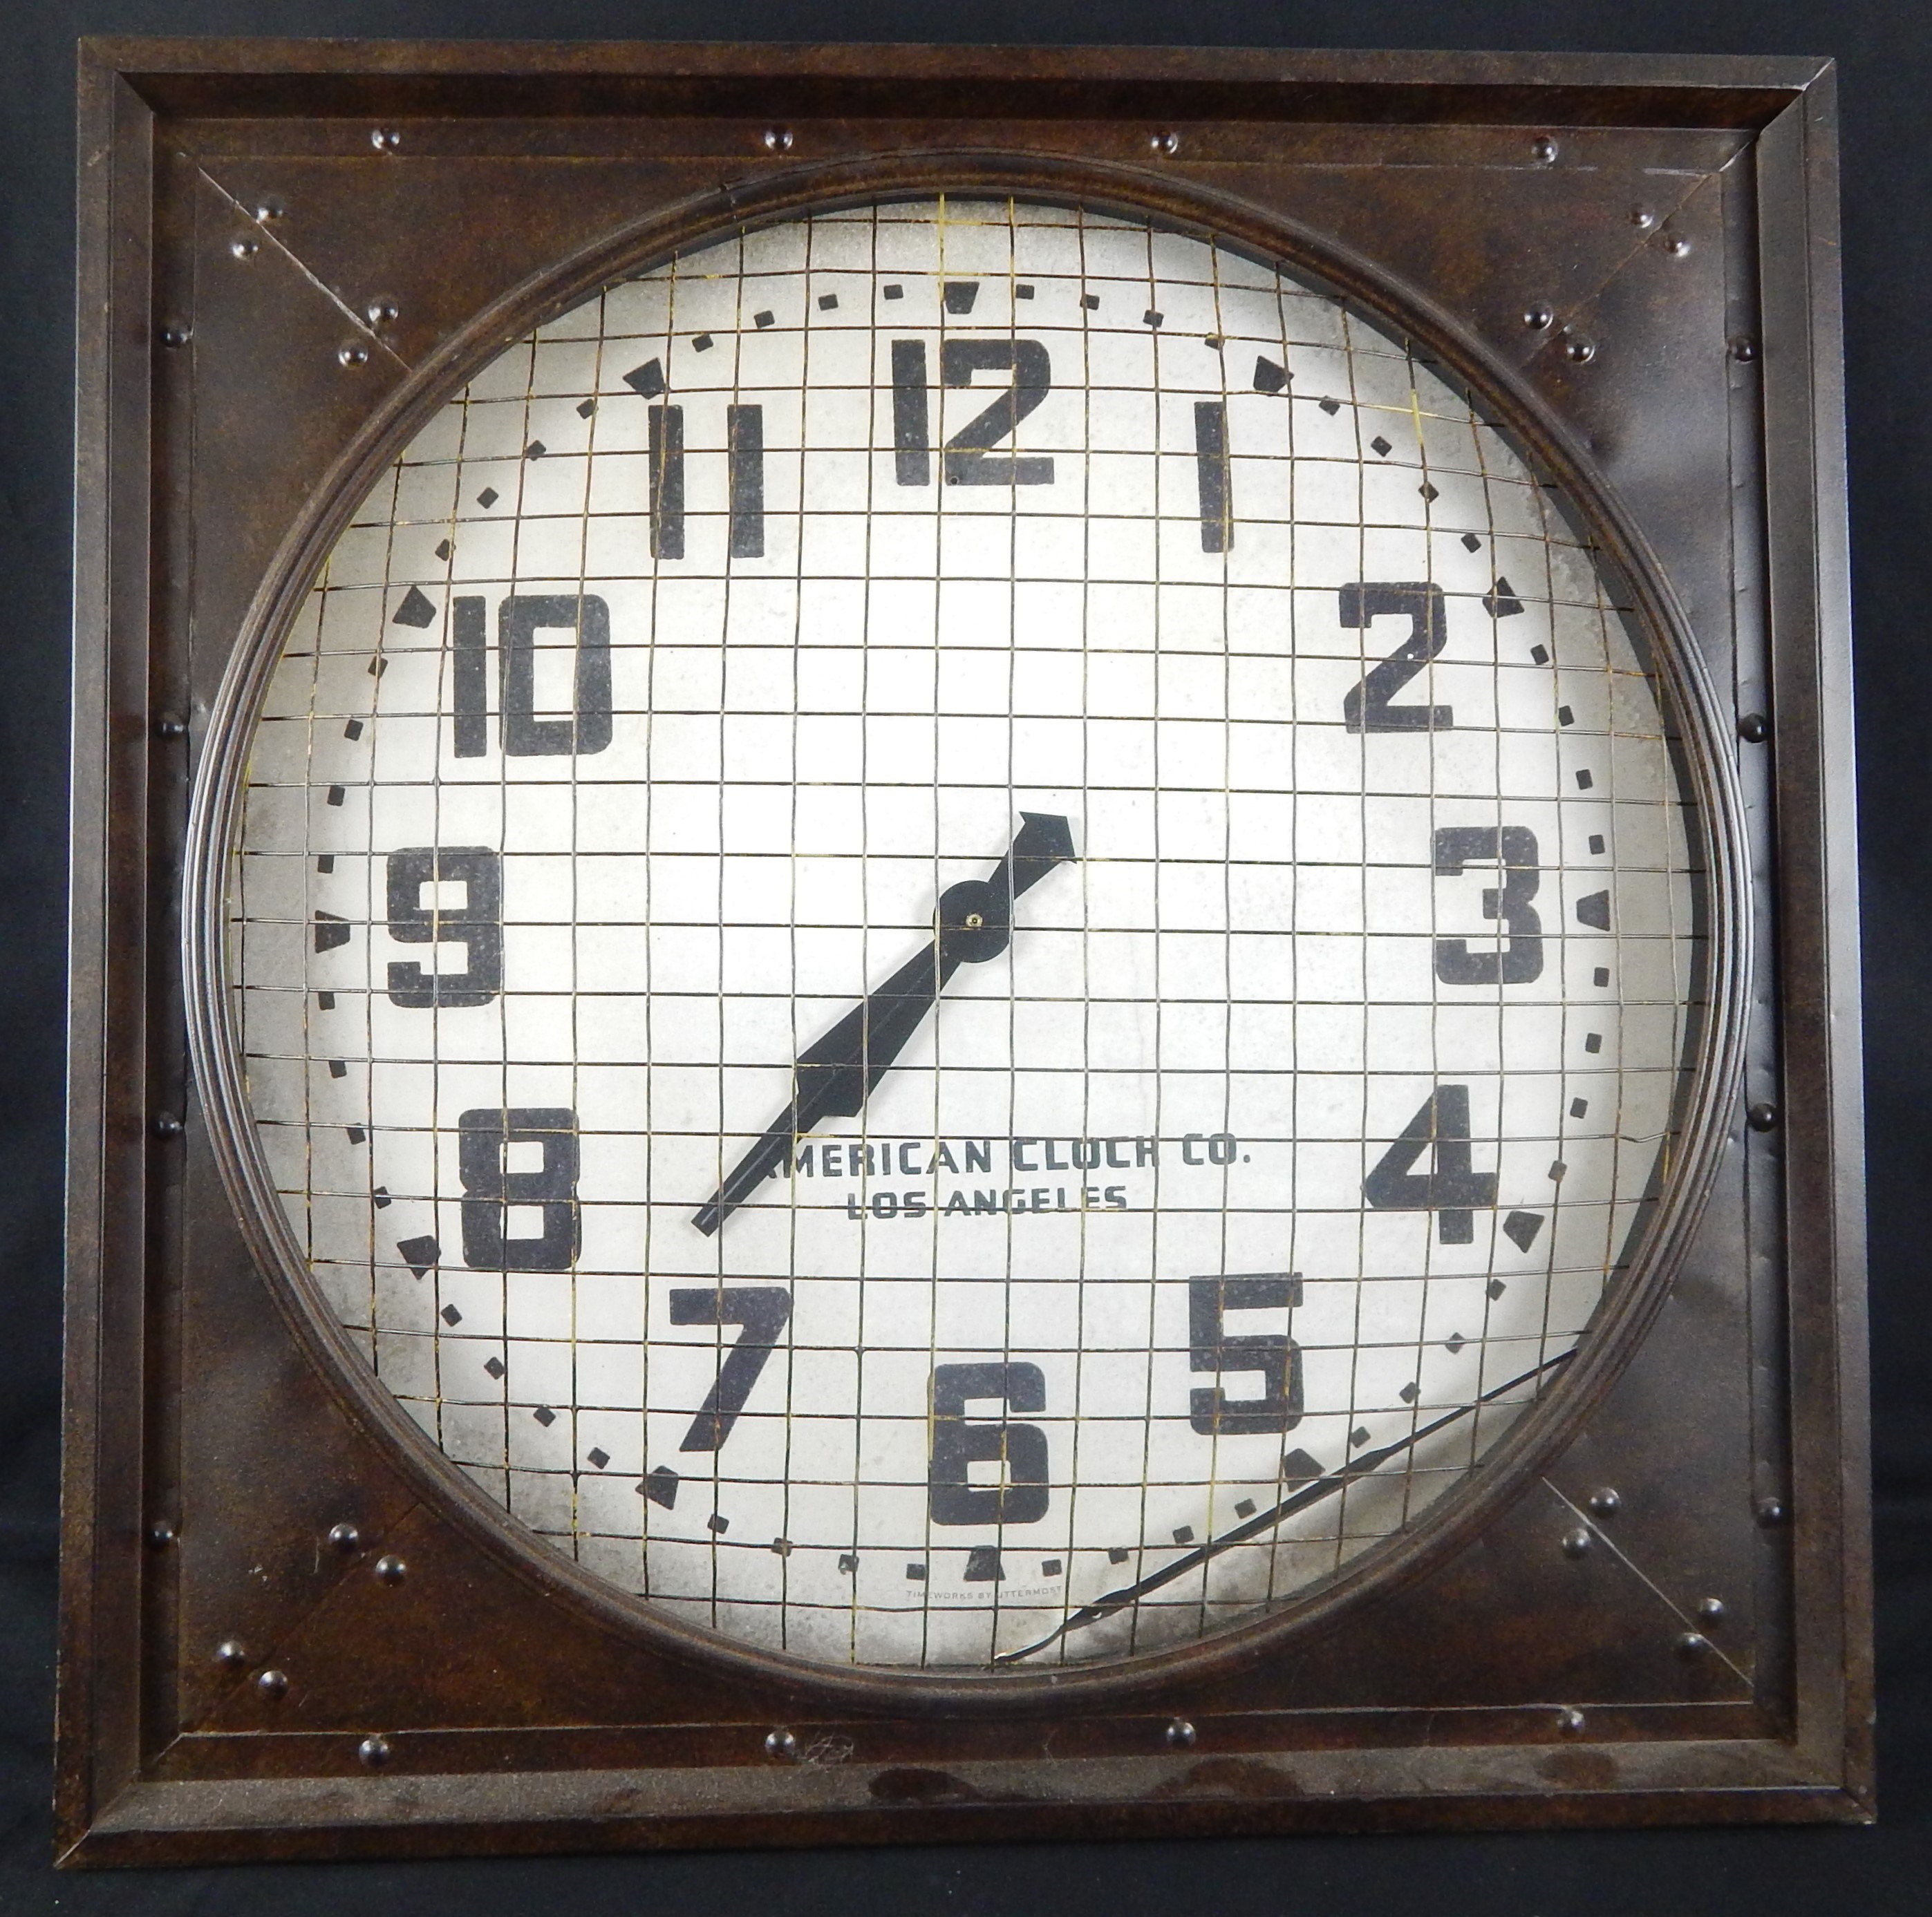 Basketball - 1930s Basketball Gymnasium Clock By American Clock Co. (Perfect Reproduction)